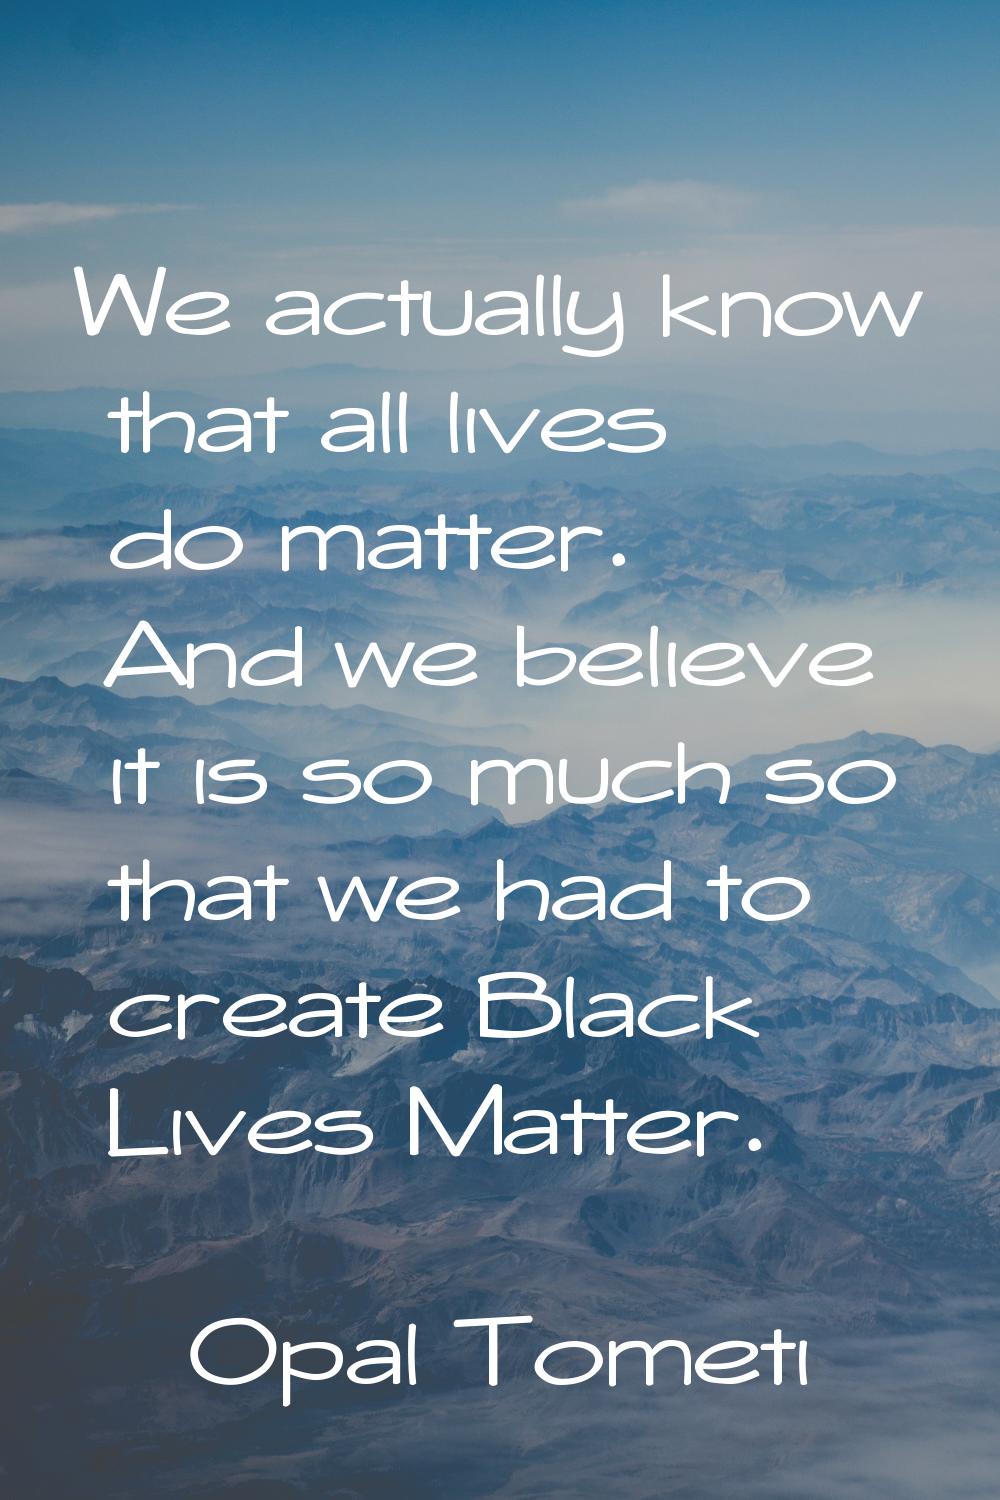 We actually know that all lives do matter. And we believe it is so much so that we had to create Bl